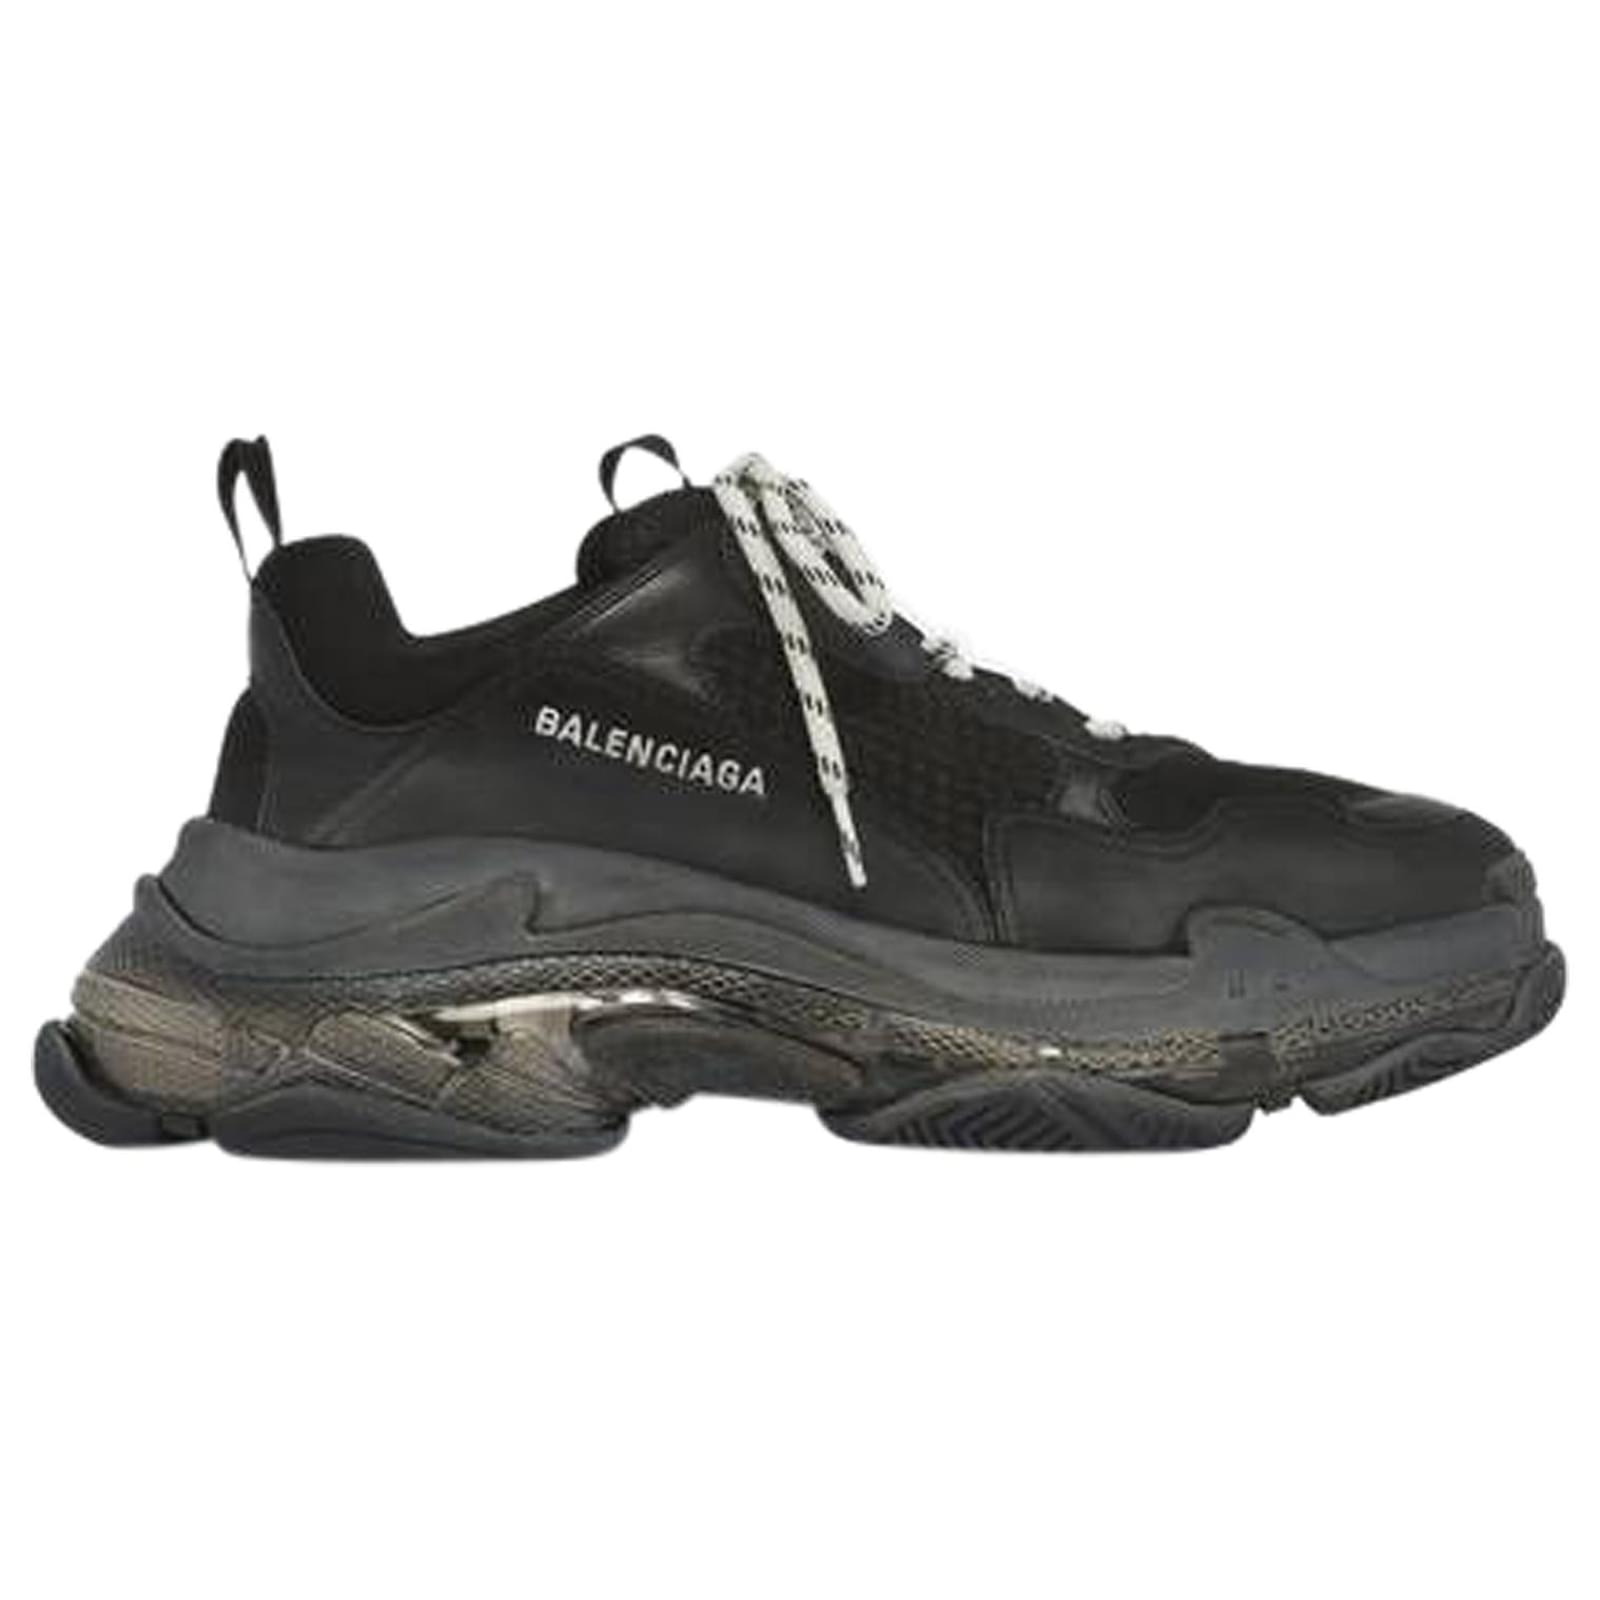 Balenciagas new 1850 distressed shoes like really  rAnticonsumption